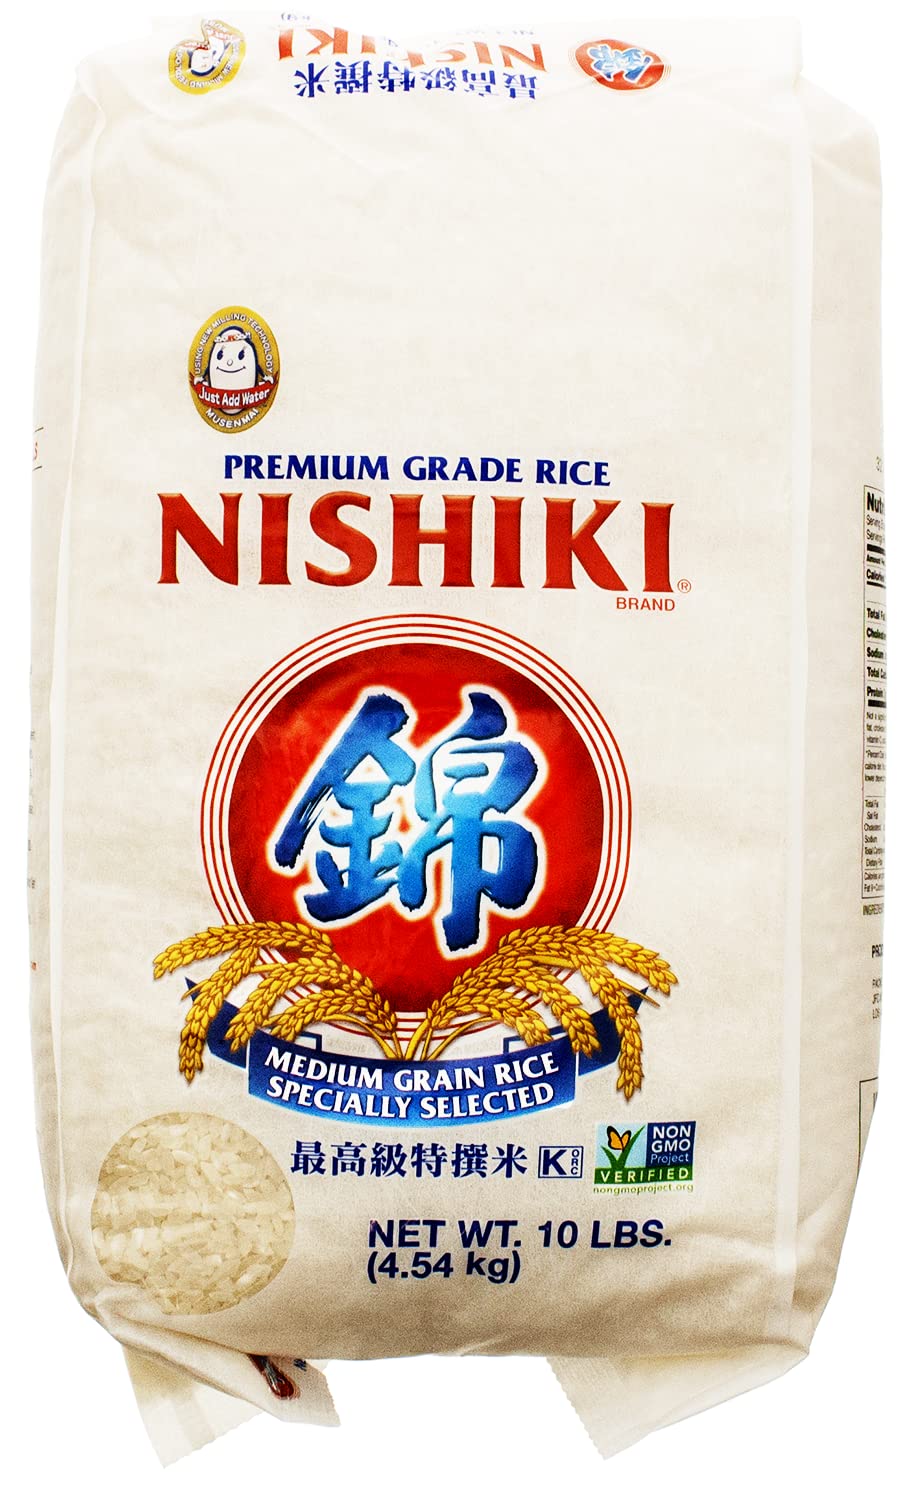 Nishiki Medium Grain Rice, in its 80-ounce packaging, is a pantry must-have for anyone who appreciates the art of cooking and the joy of eating. This premium quality rice is a versatile ingredient that complements an array of dishes, from the simple to the exotic. Here's why it has become a staple in my kitchen:Quality and Texture: Nishiki rice cooks up perfectly every time, yielding fluffy, slightly sticky grains that hold together well, making it ideal for sushi, poke bowls, or even as a side